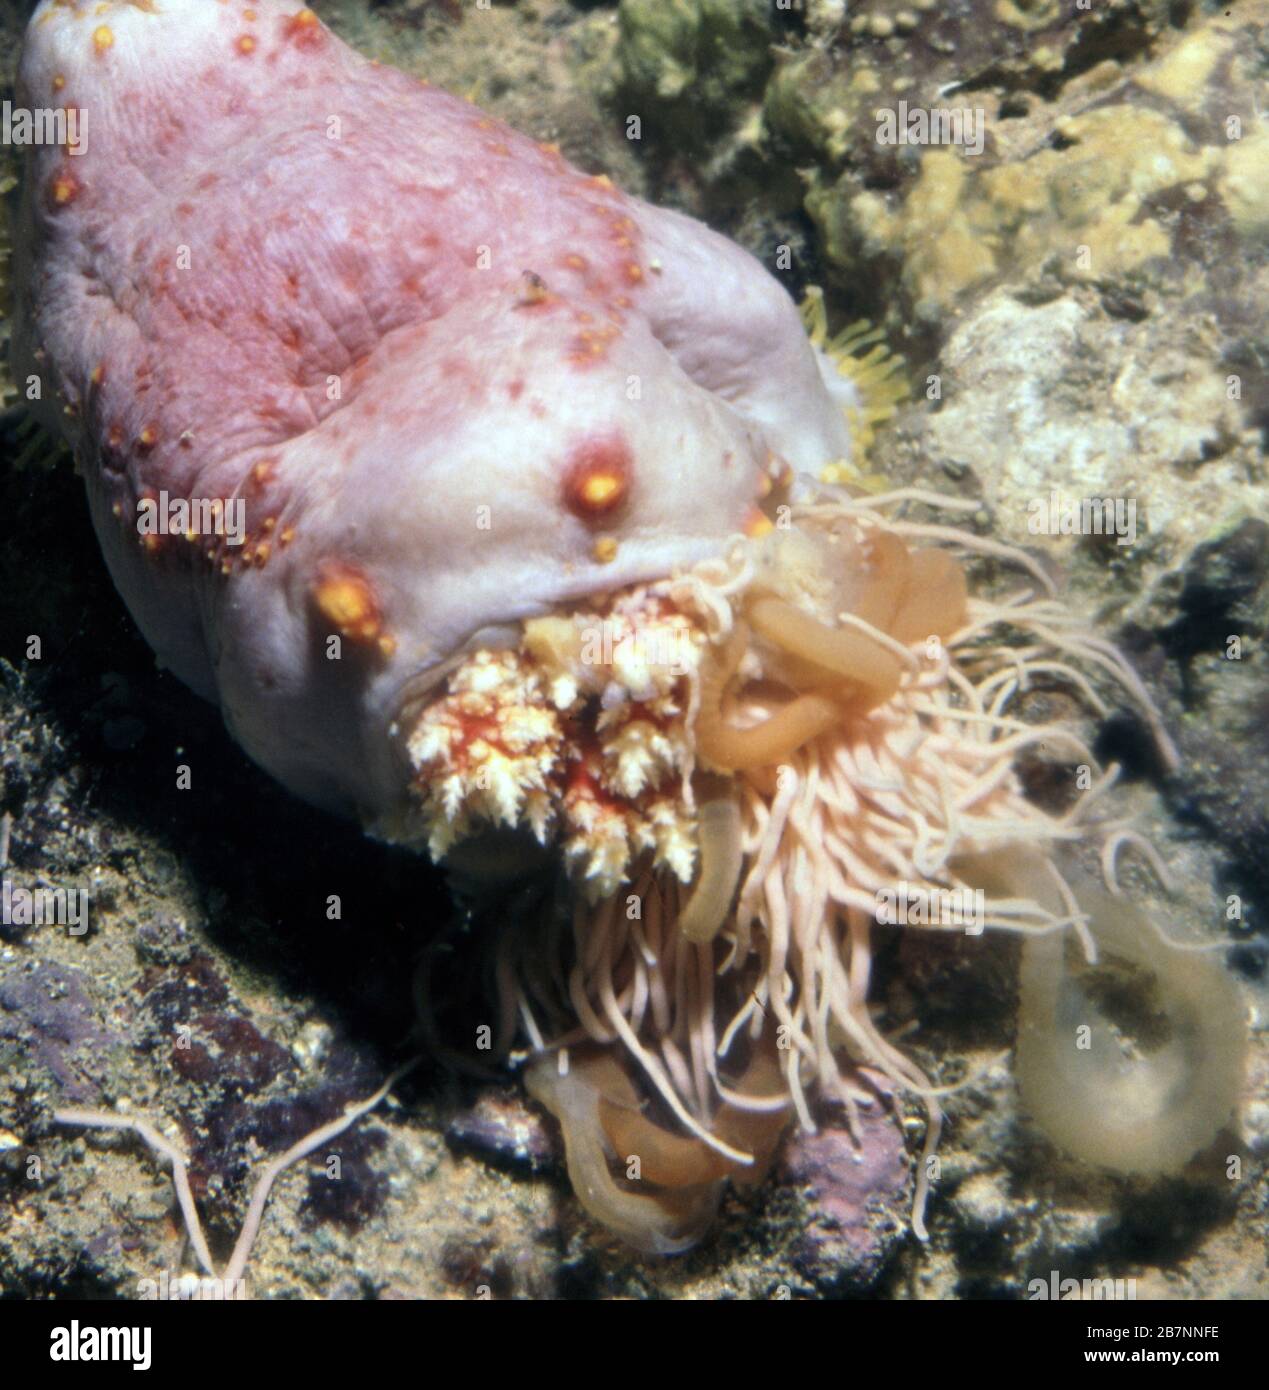 Cuvierian tubules discharged as defence by a sea cucumber (Pseudocolochirus) Stock Photo